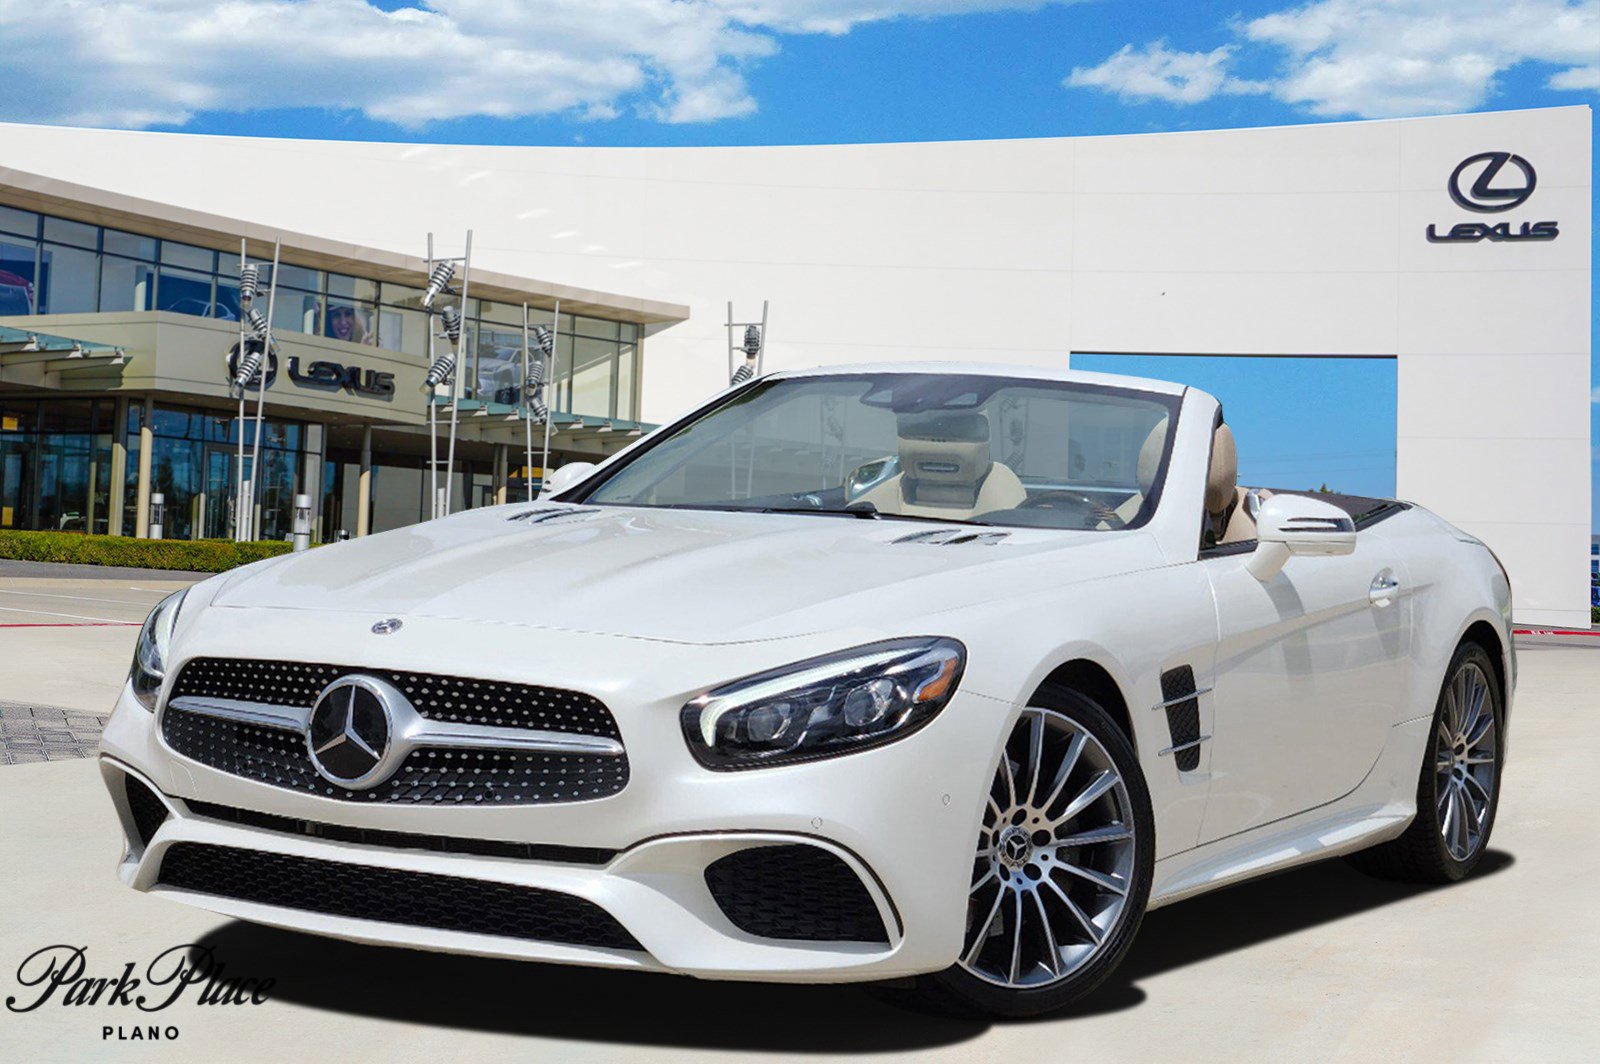 Used 2019 Mercedes-Benz SL 450 for Sale Right Now - Autotrader